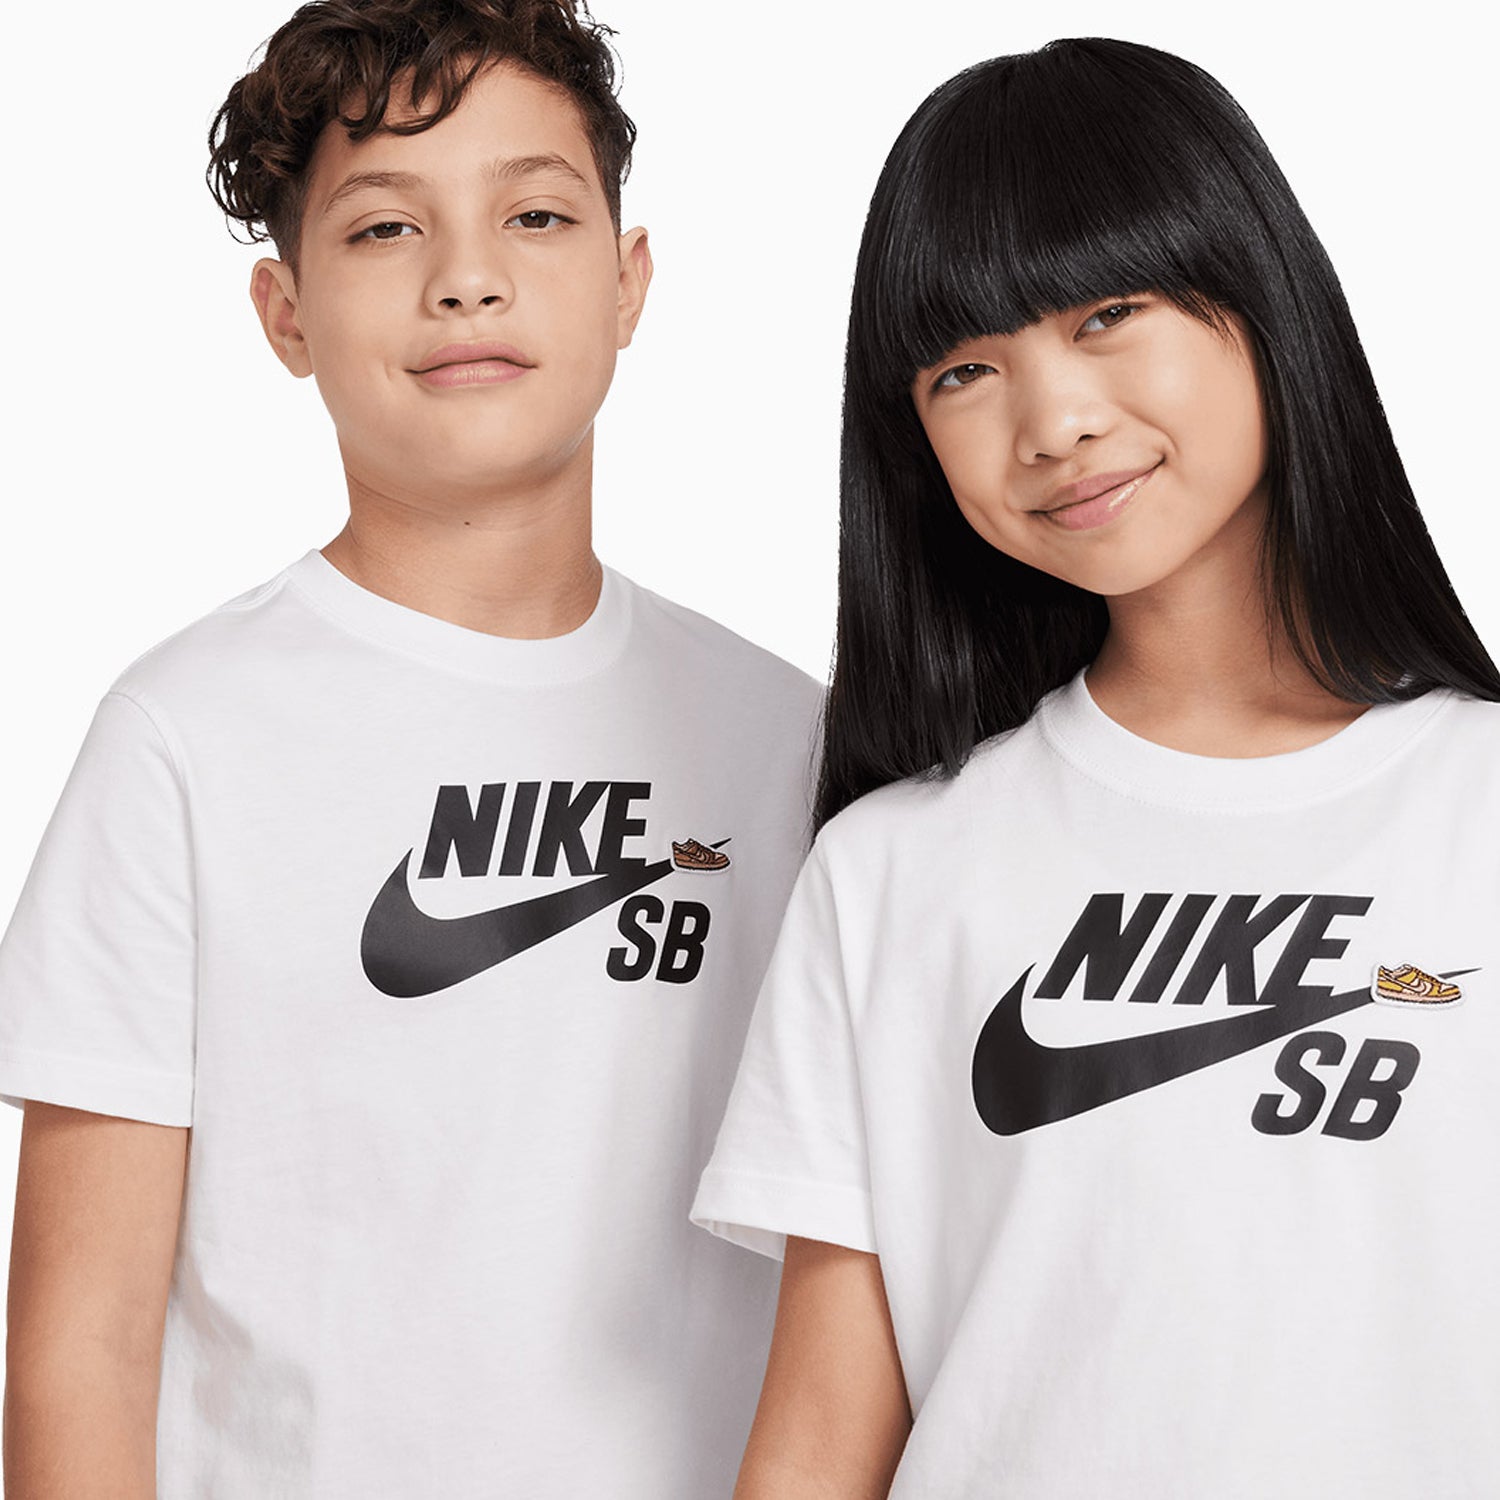 nike-kids-sportswear-t-shirt-and-shorts-outfit-fn9673-100/FD3289-010